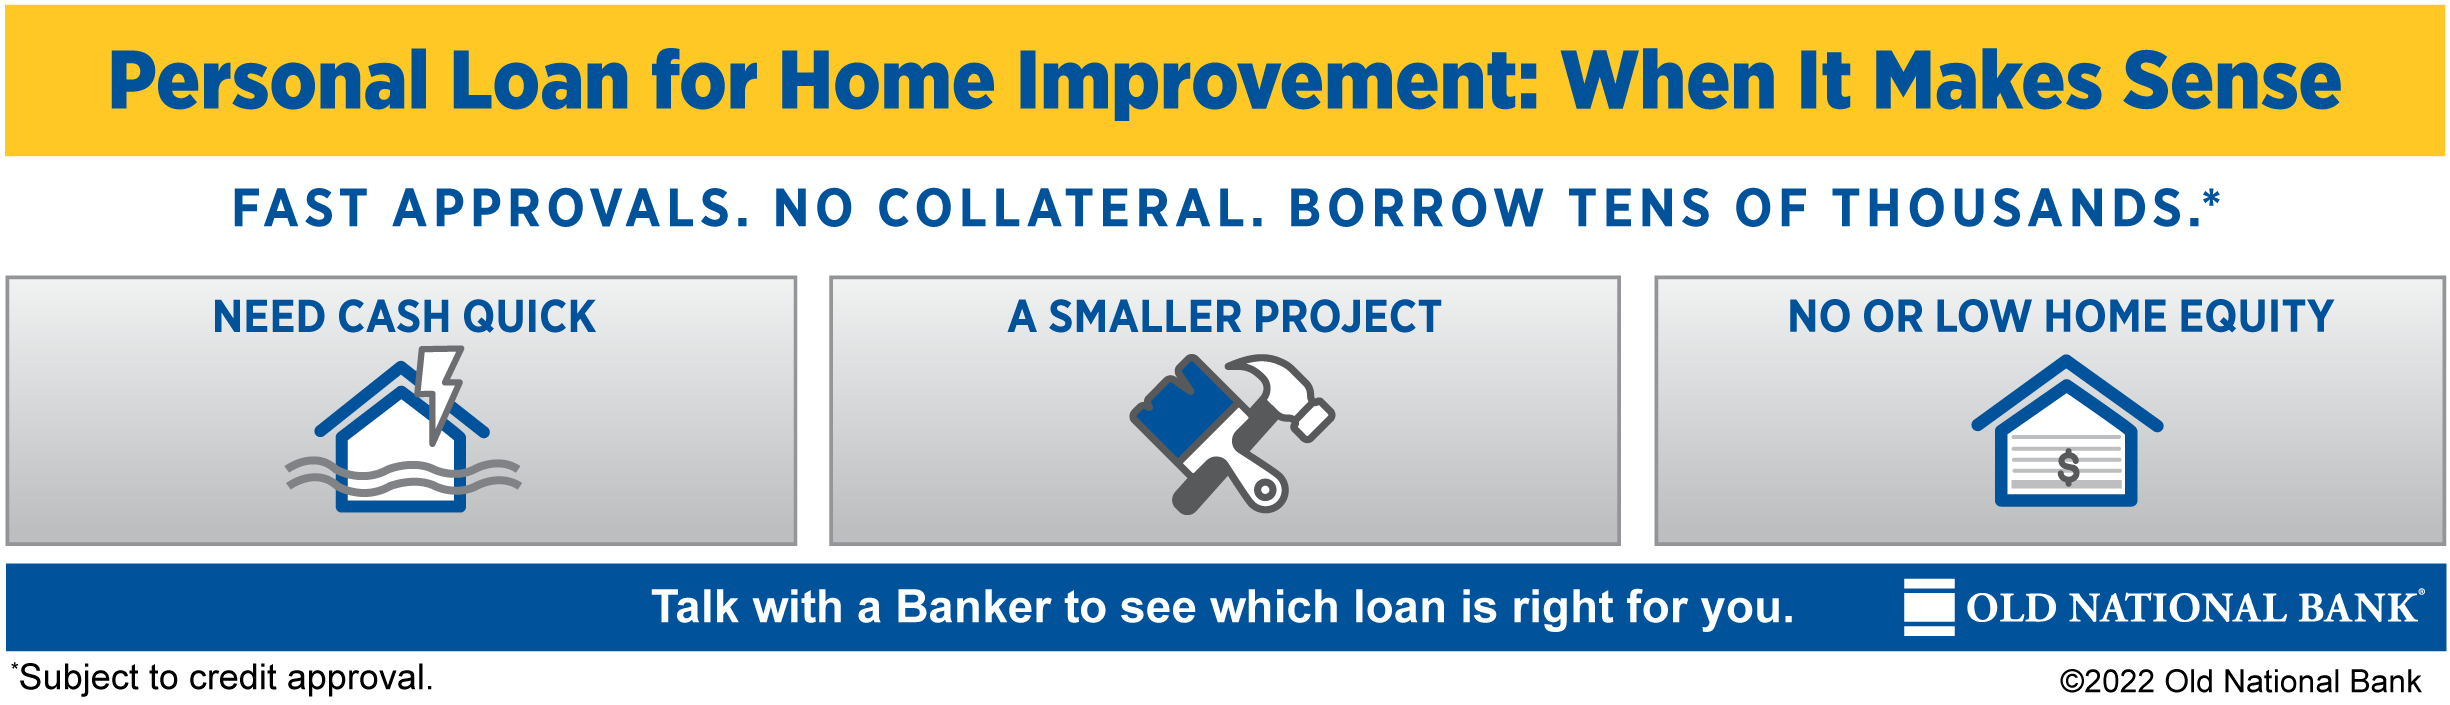 Personal Loan for Home Improvement